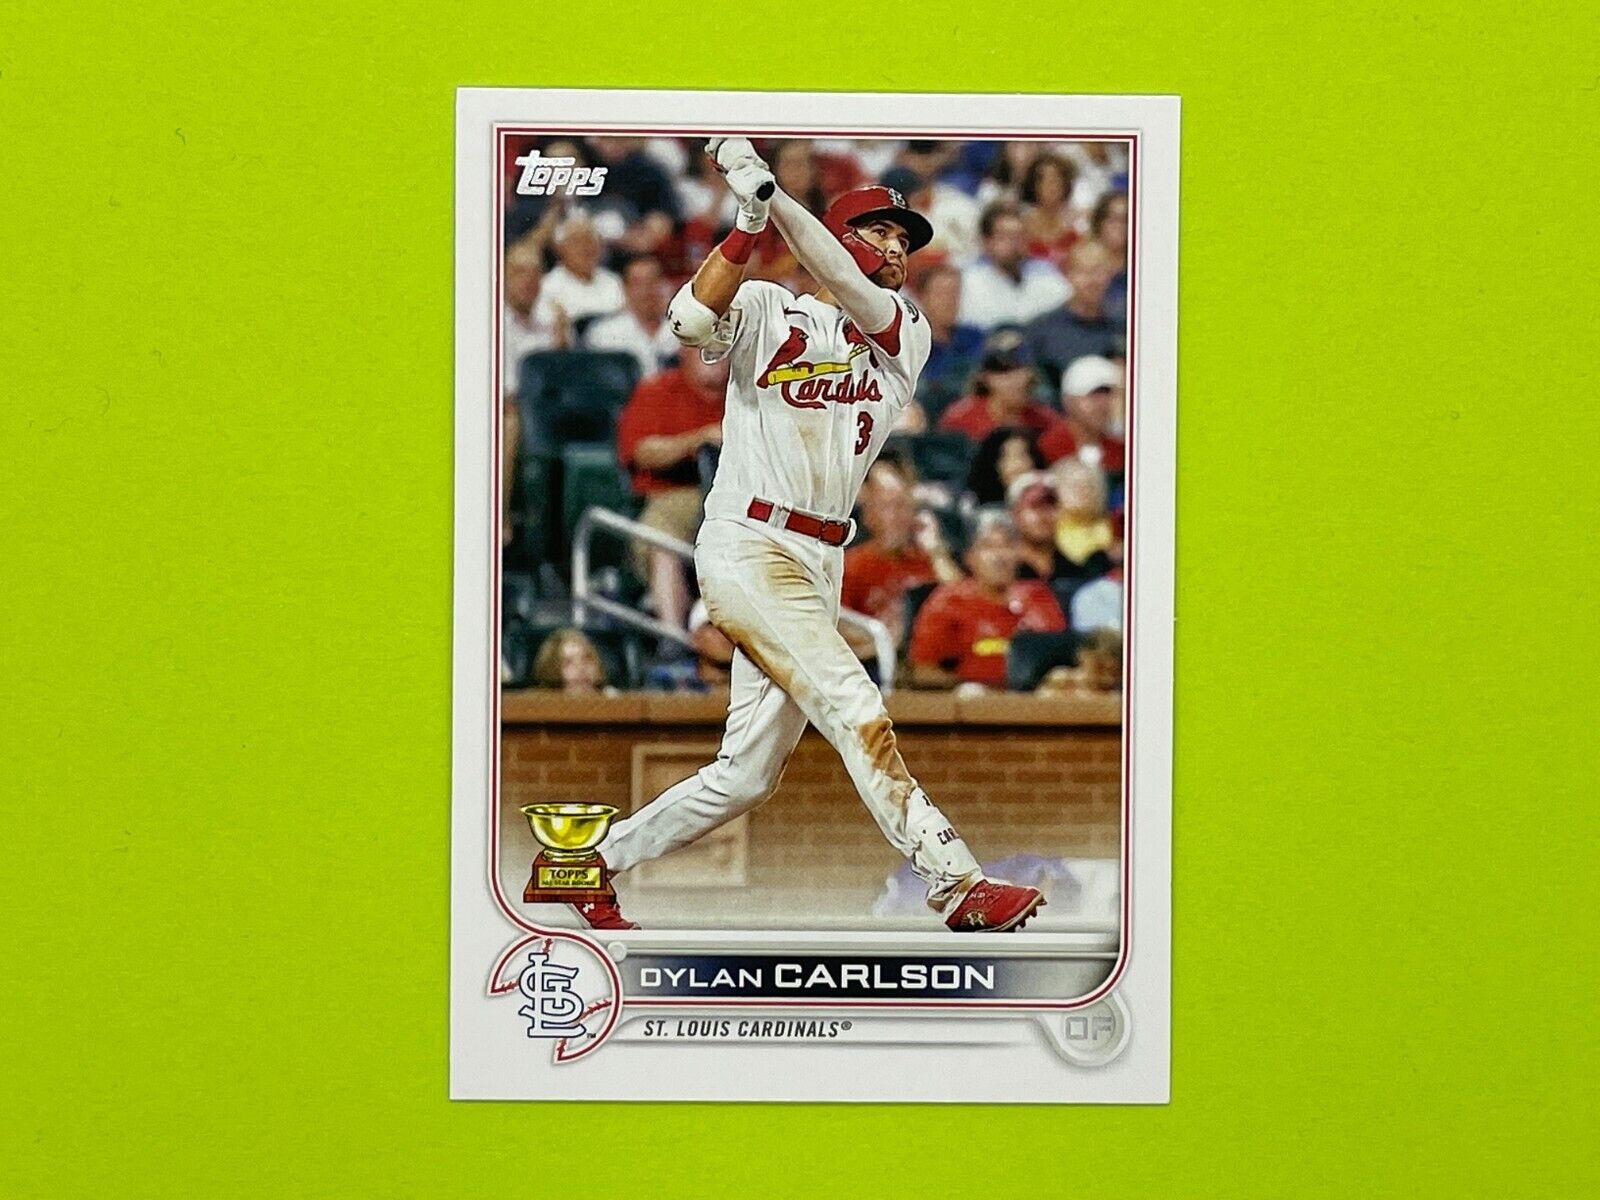 Card #:#578 Dylan Carlson - St. Louis Cardinals:2022 Topps Baseball Cards Series 2 #496-660 You Pick & Complete Your Set.